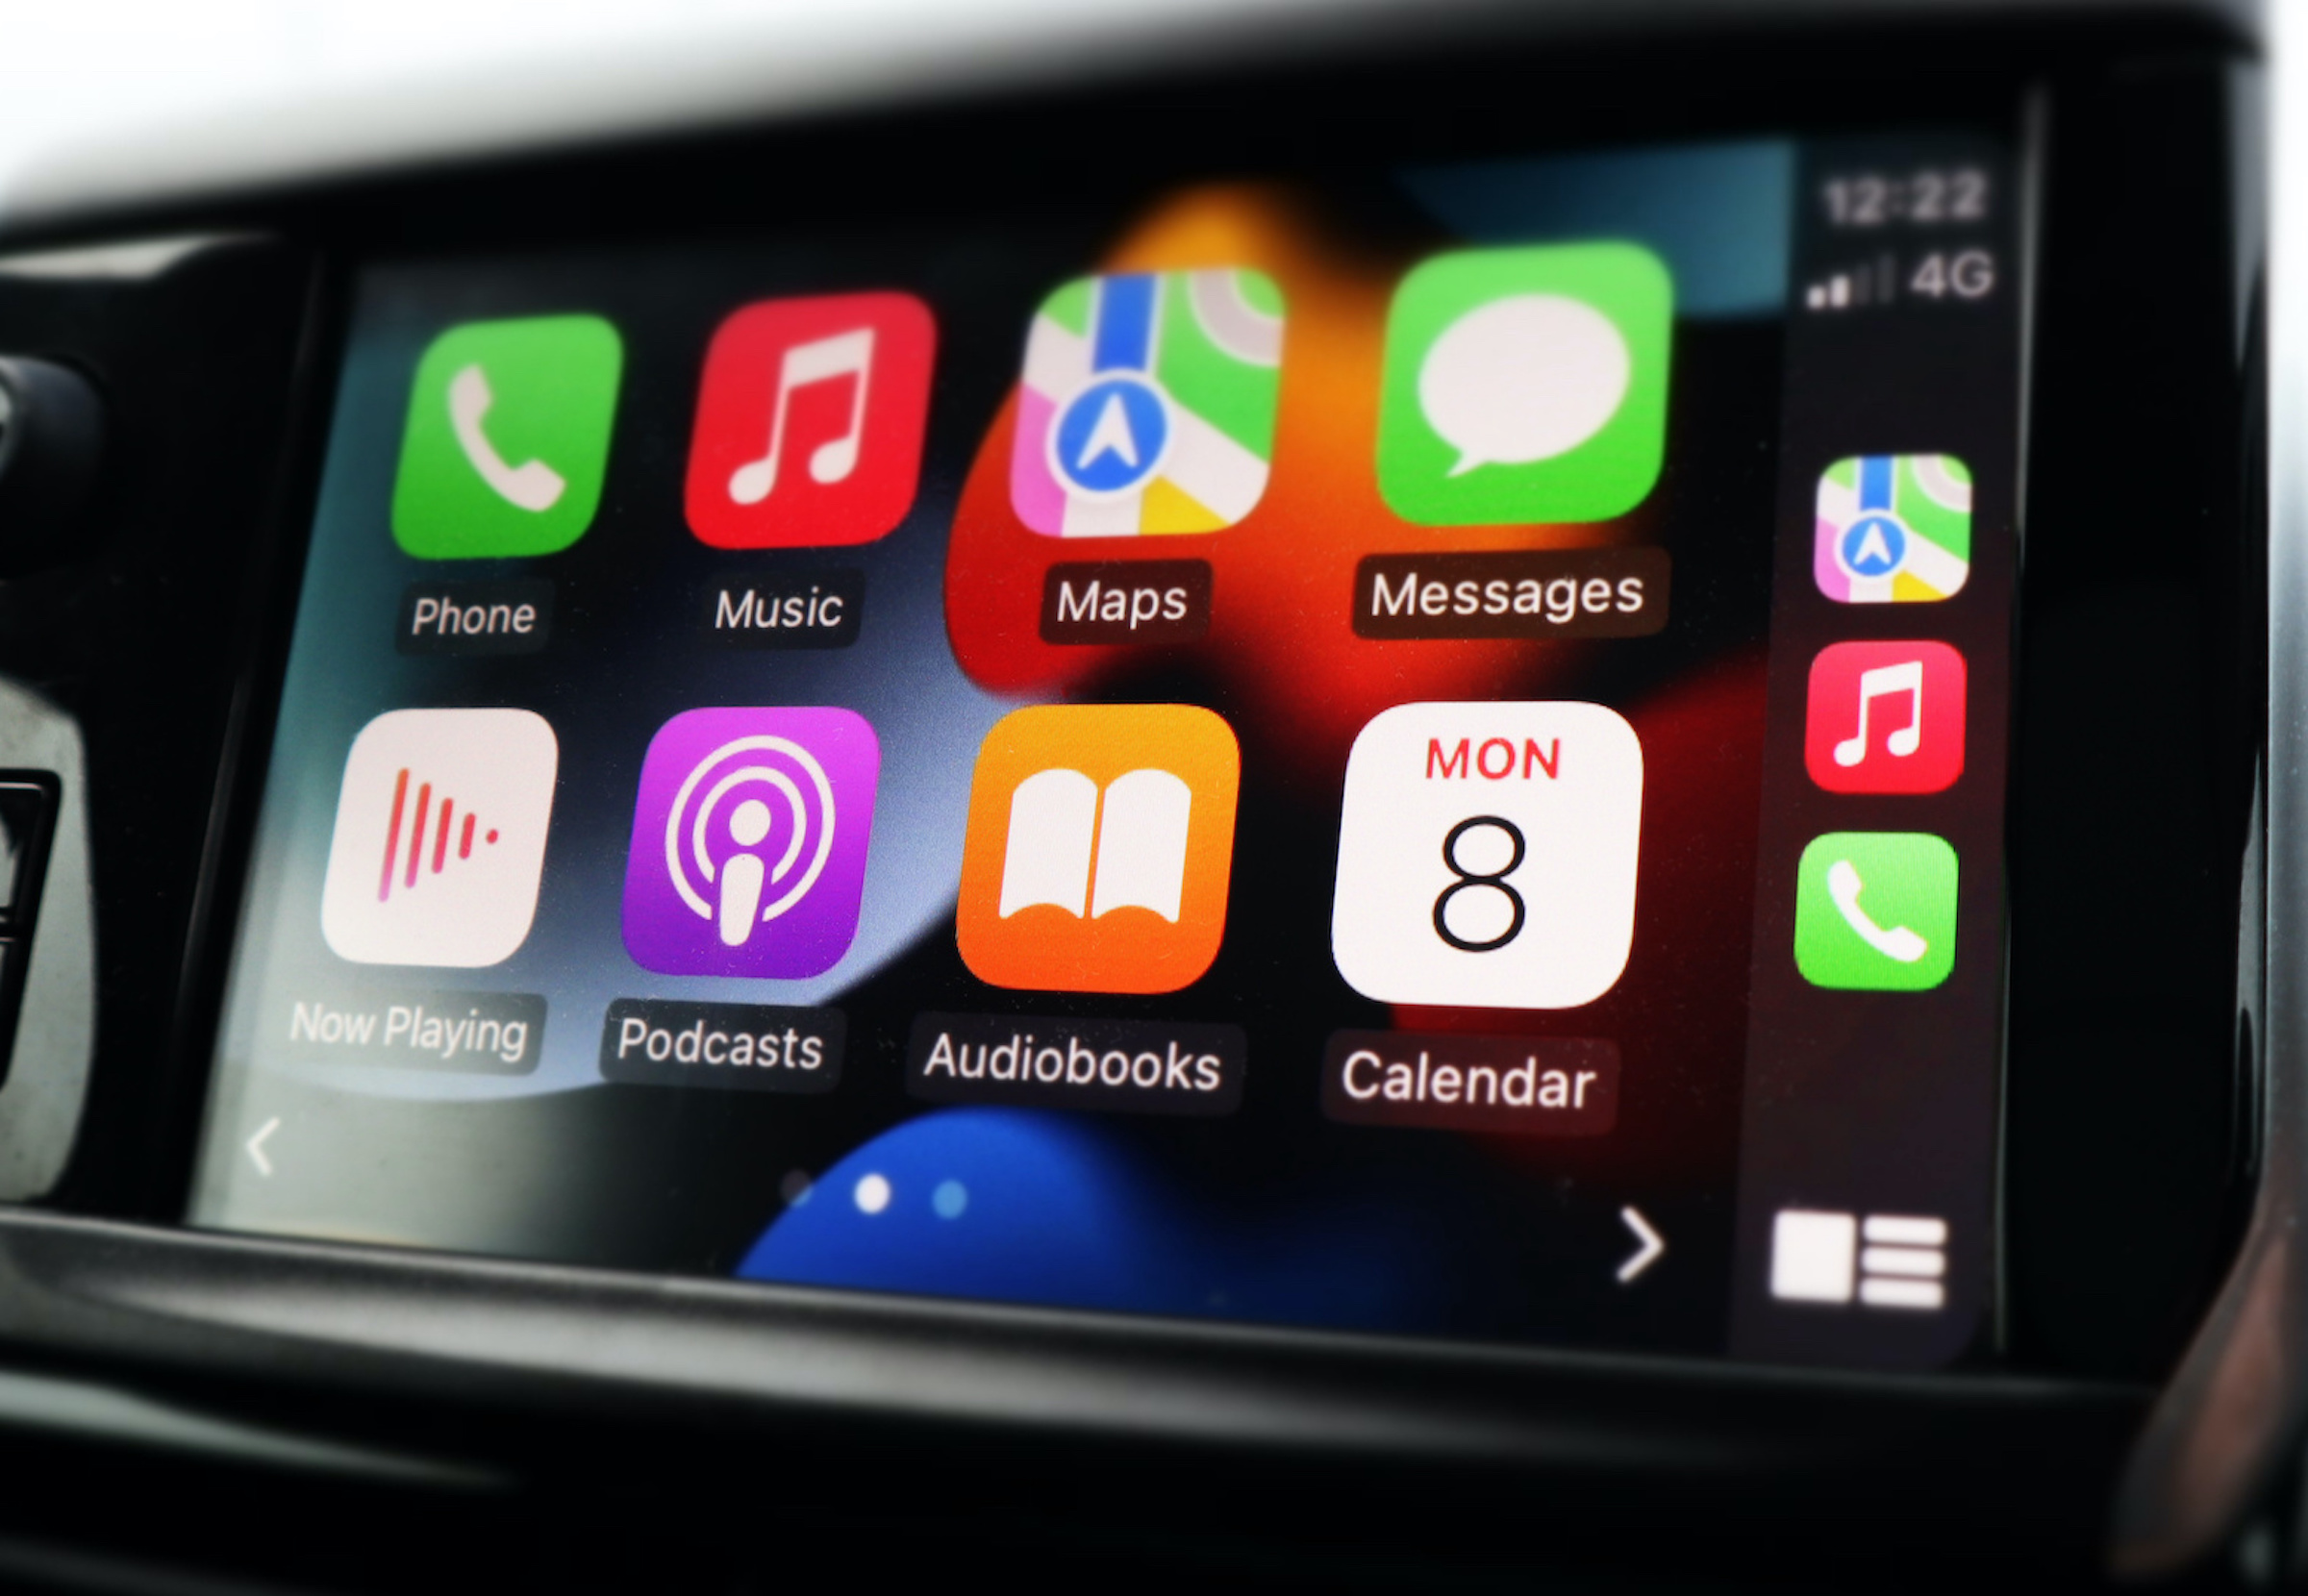 A photo of Apple Carplay with a prominent Podcast icon.